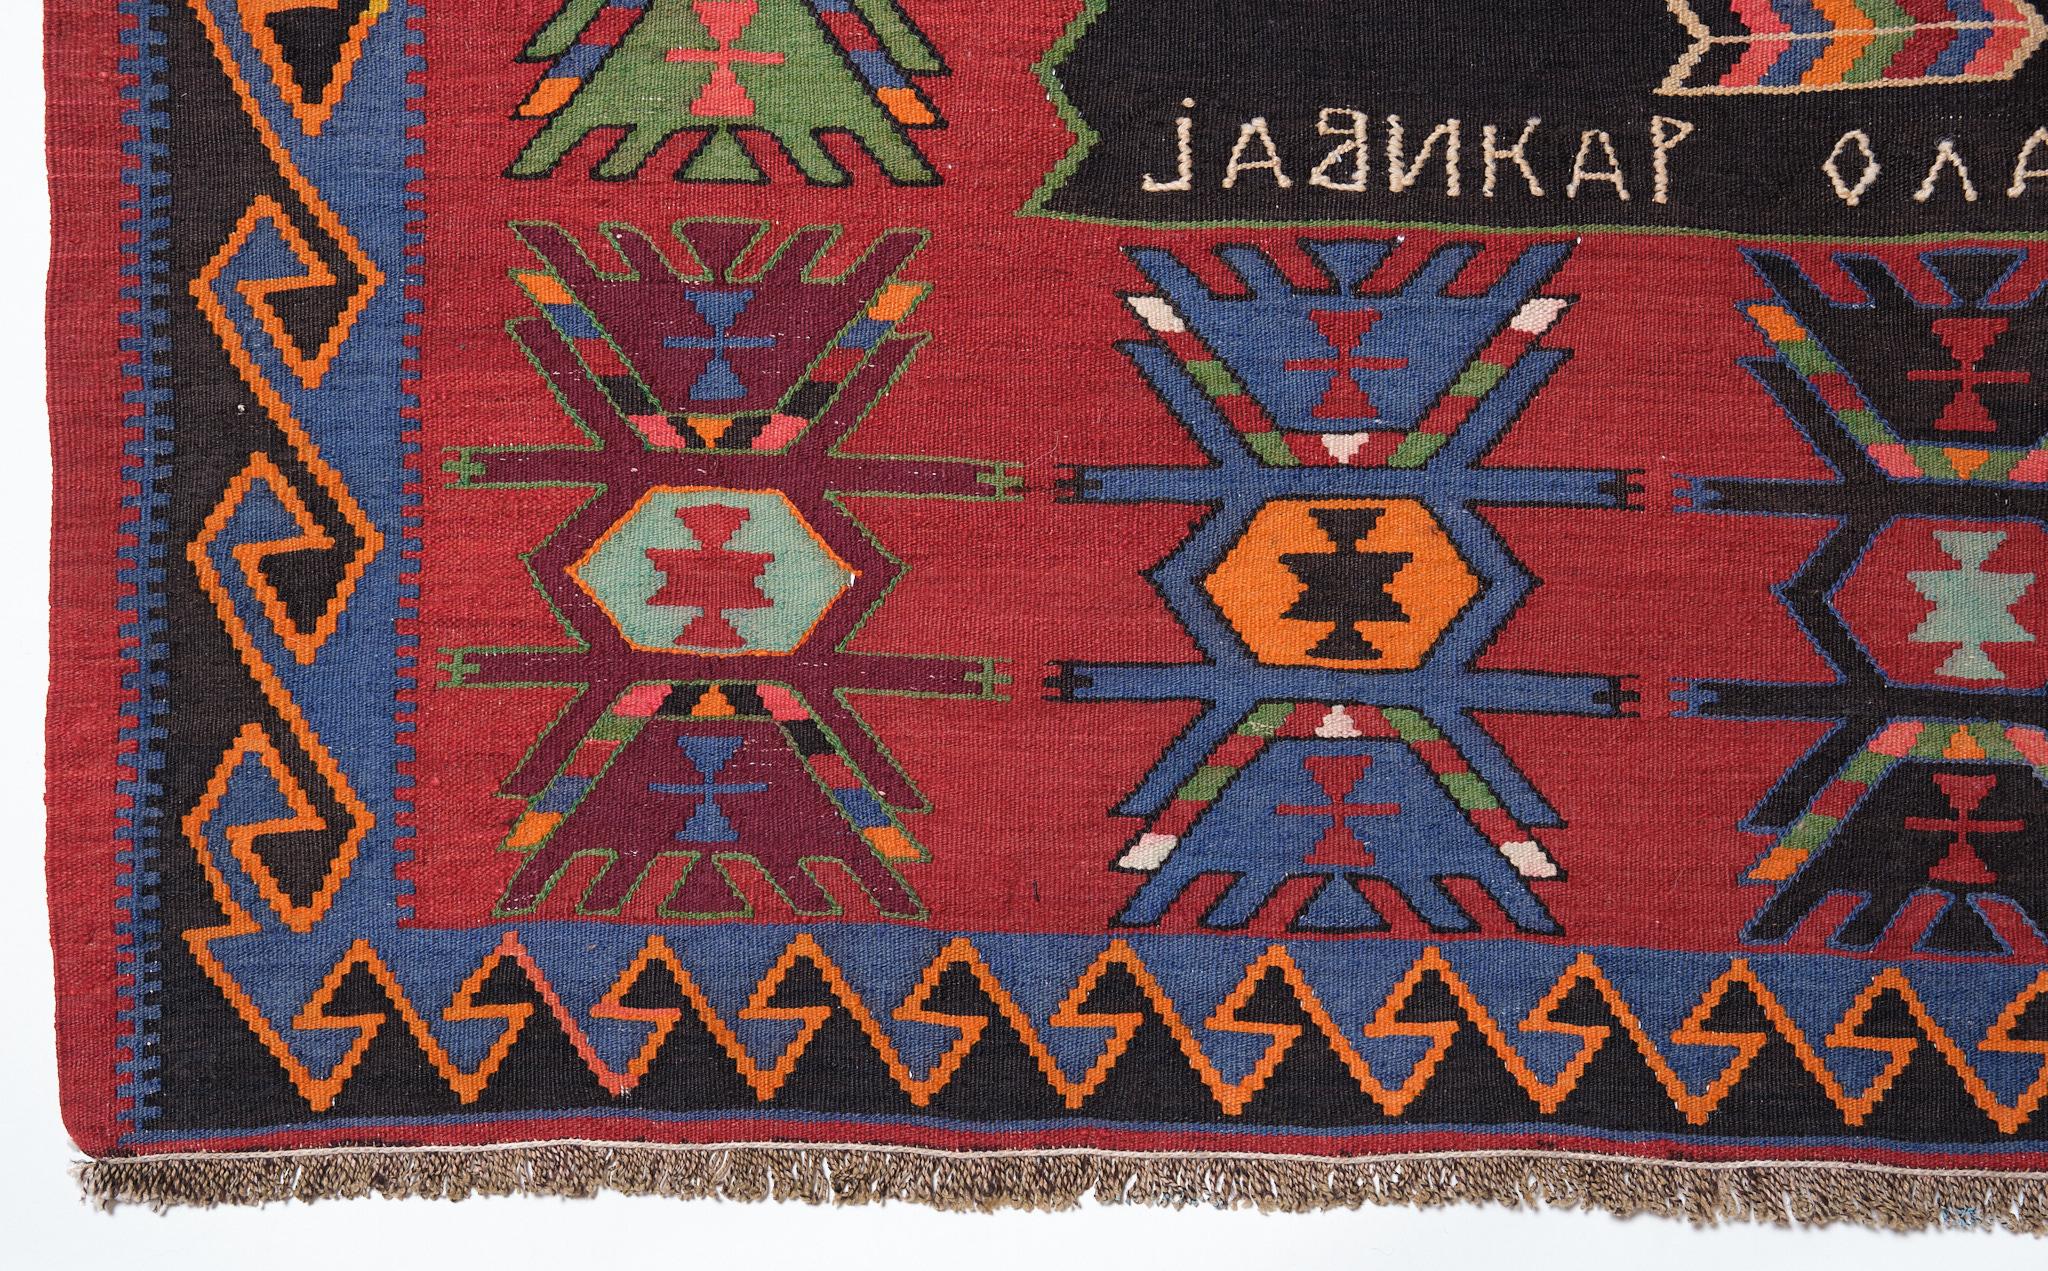 This is a large, Caucasian Old Kilim from the Kuba region with a red background and beautiful color composition.

This Kilim is from Kuba, a city in Azerbaijan in the Caucasus region. It is characterized by bright colors using strong dyed colors.